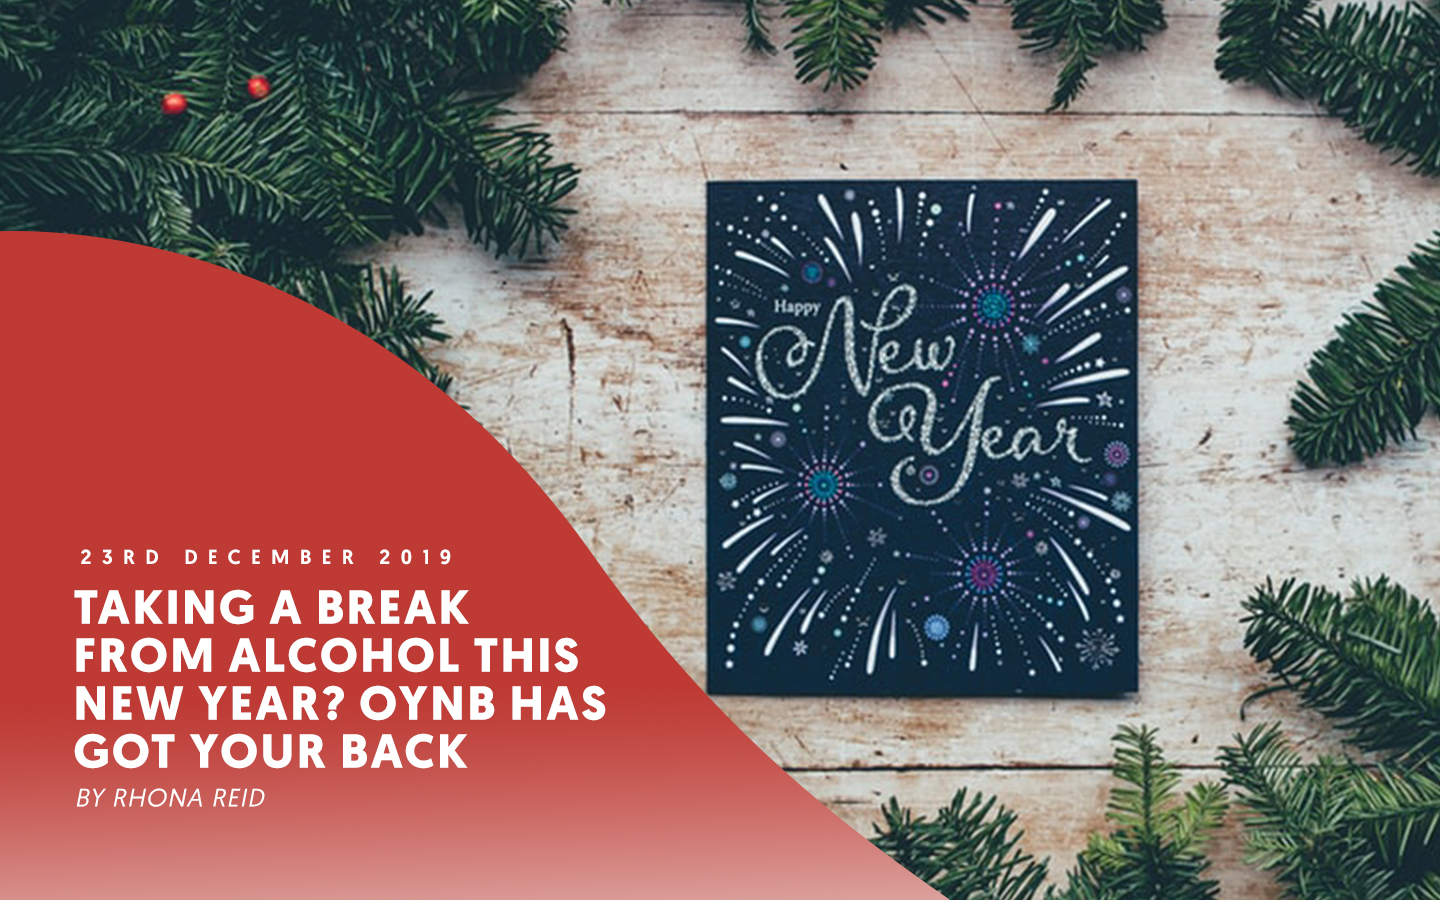 Taking a break from alcohol this New Year? OYNB has got your back